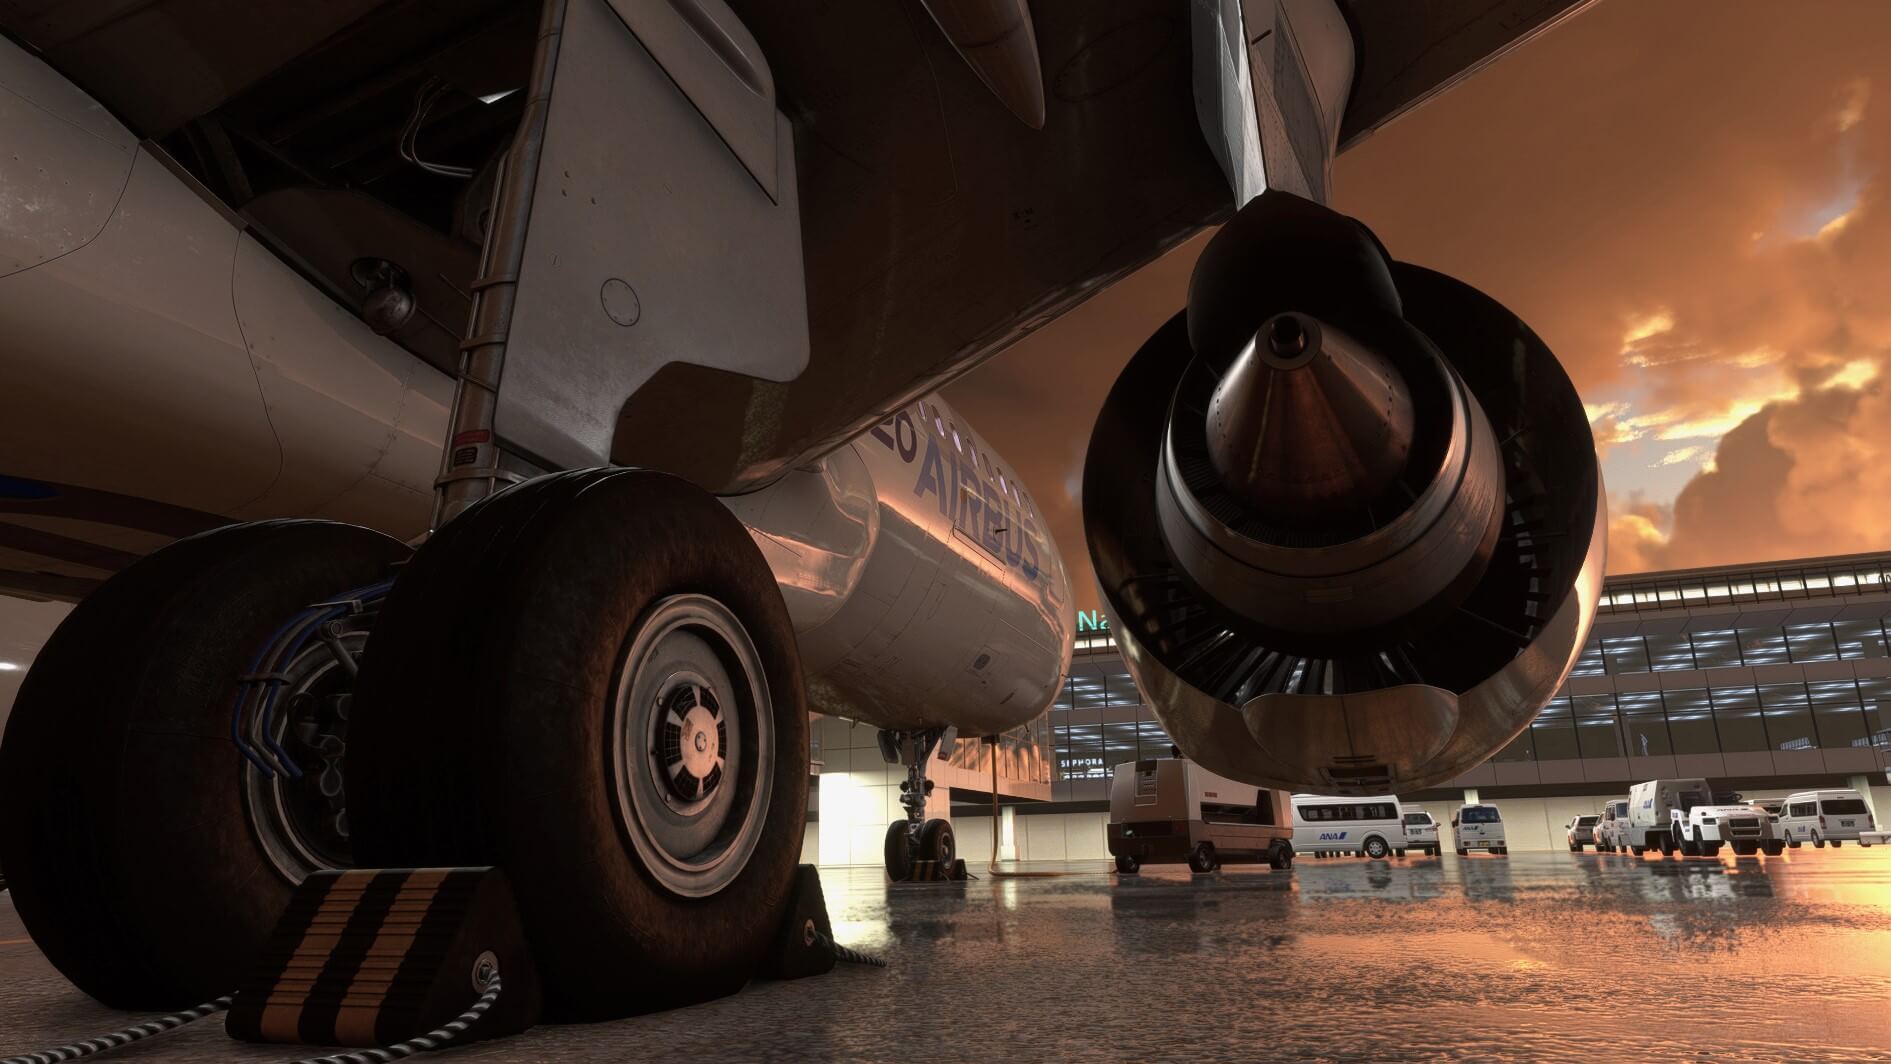 A view from next to the right landing gear of an Airbus A320 with the right engine in view as it is parked on the ramp.